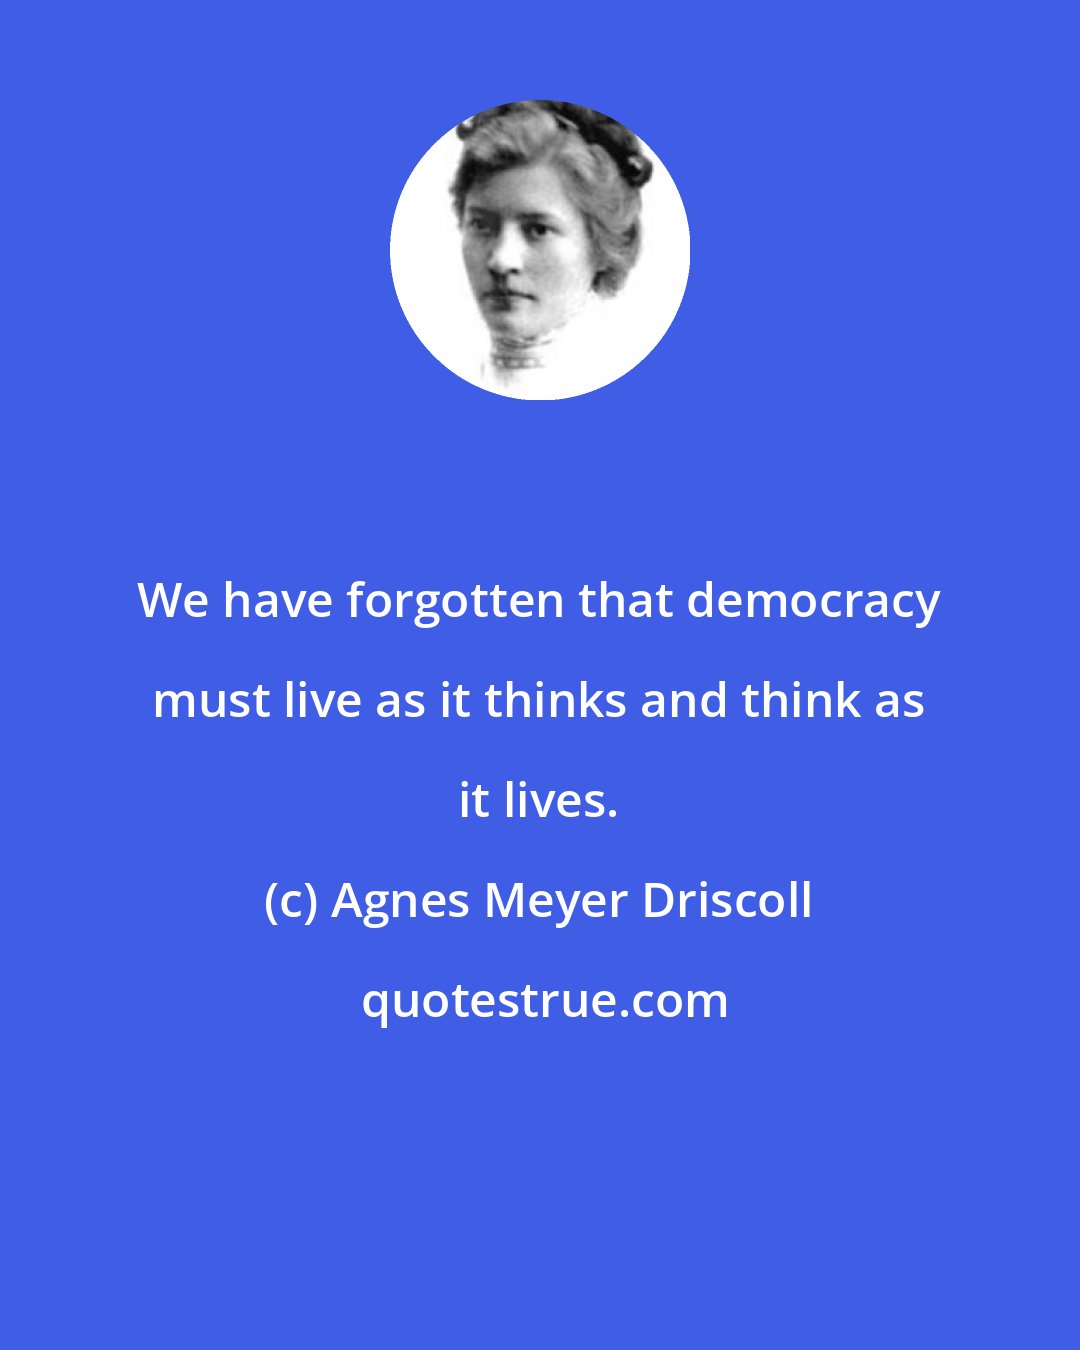 Agnes Meyer Driscoll: We have forgotten that democracy must live as it thinks and think as it lives.